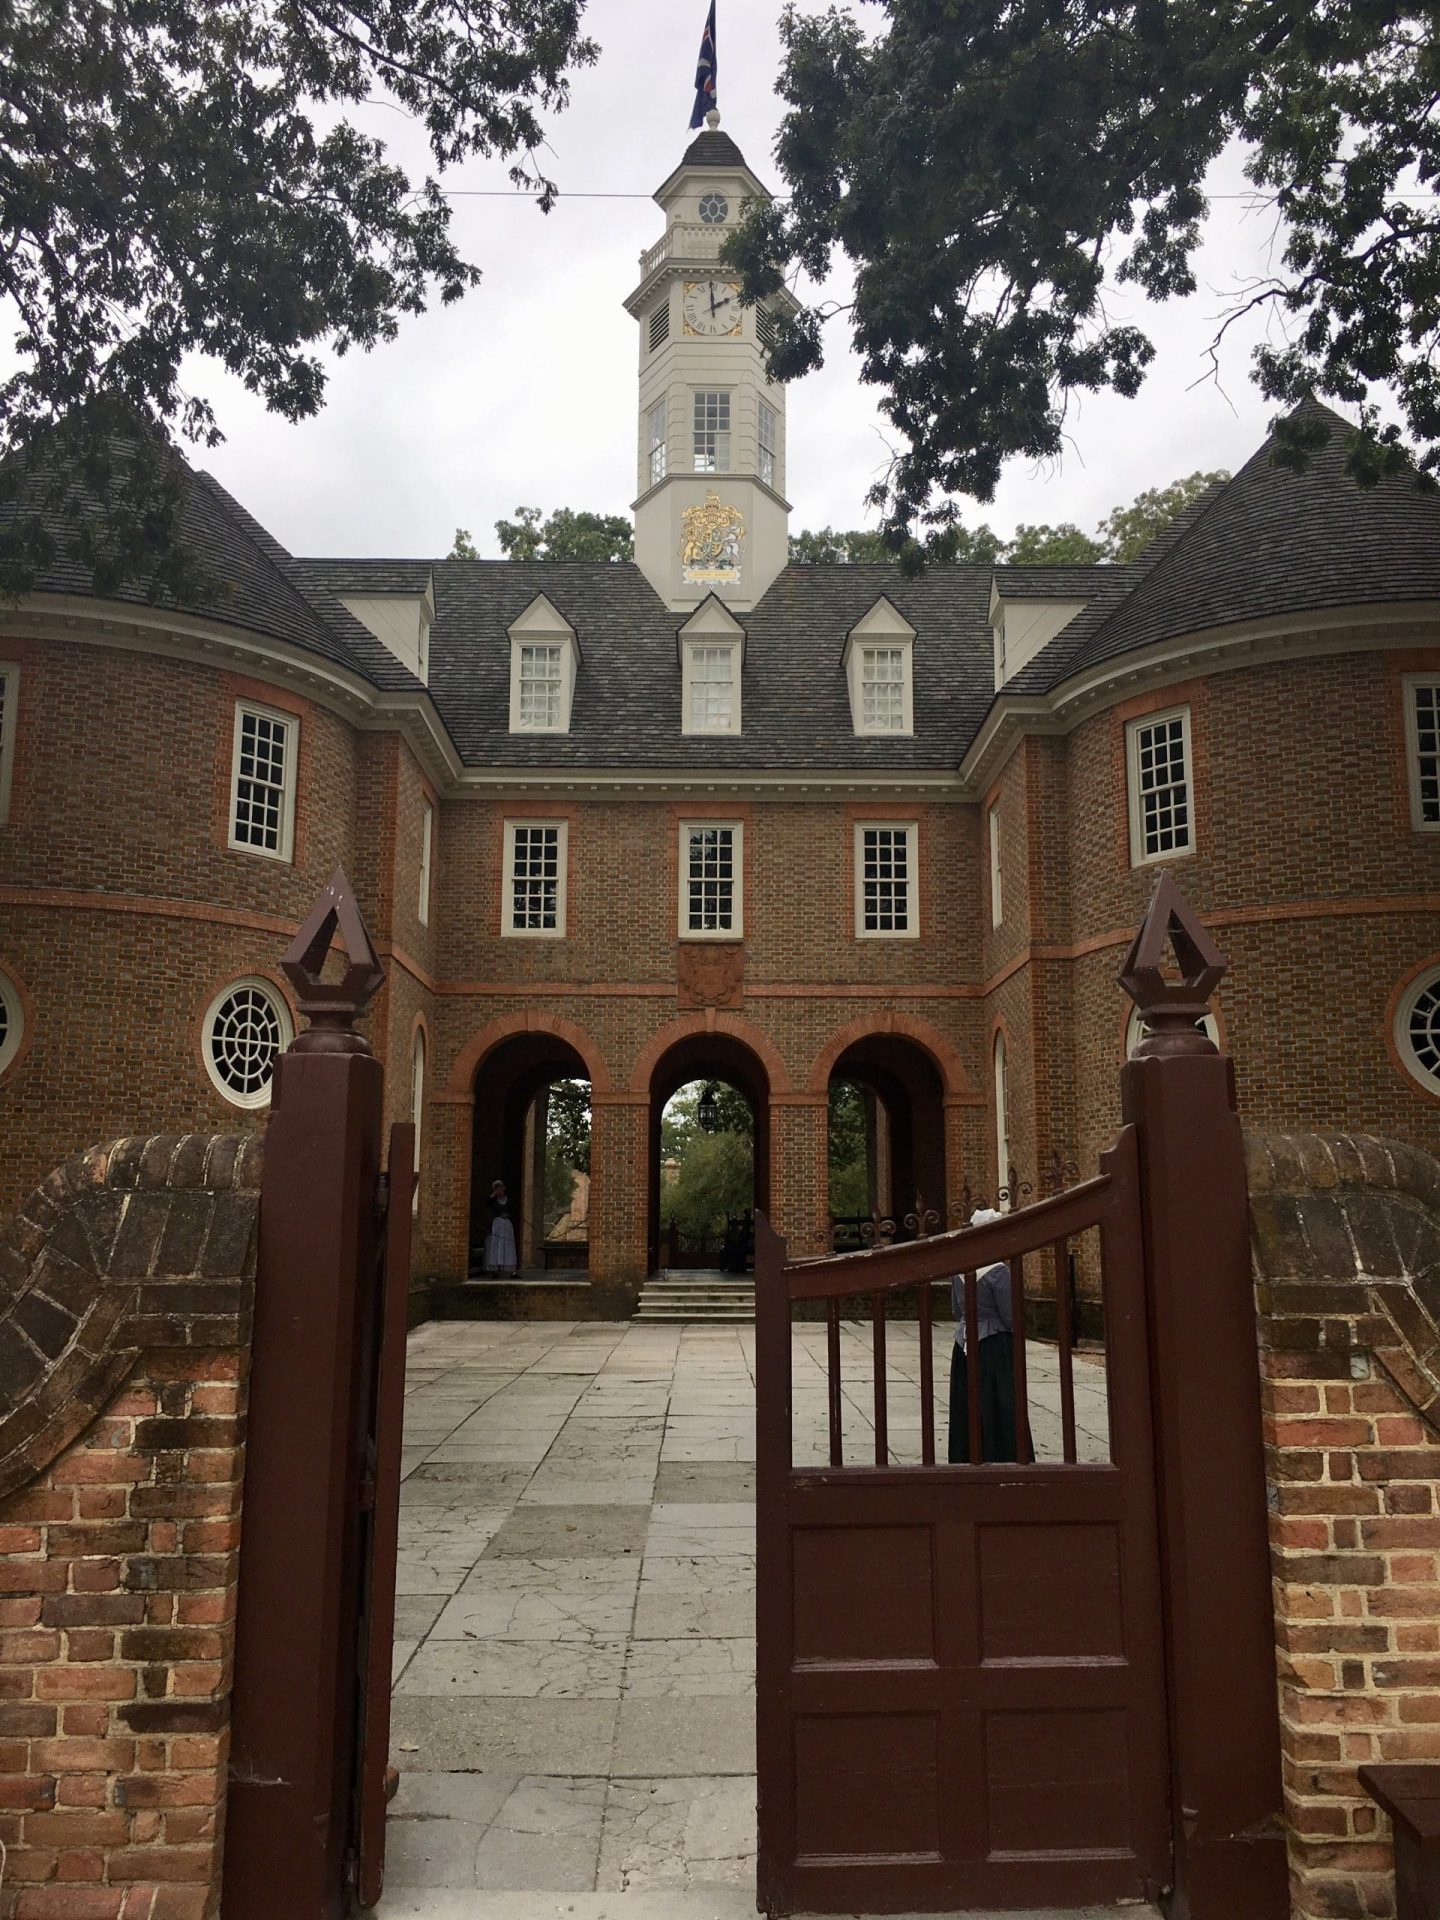 How Much Does It Cost to Get into Colonial Williamsburg?